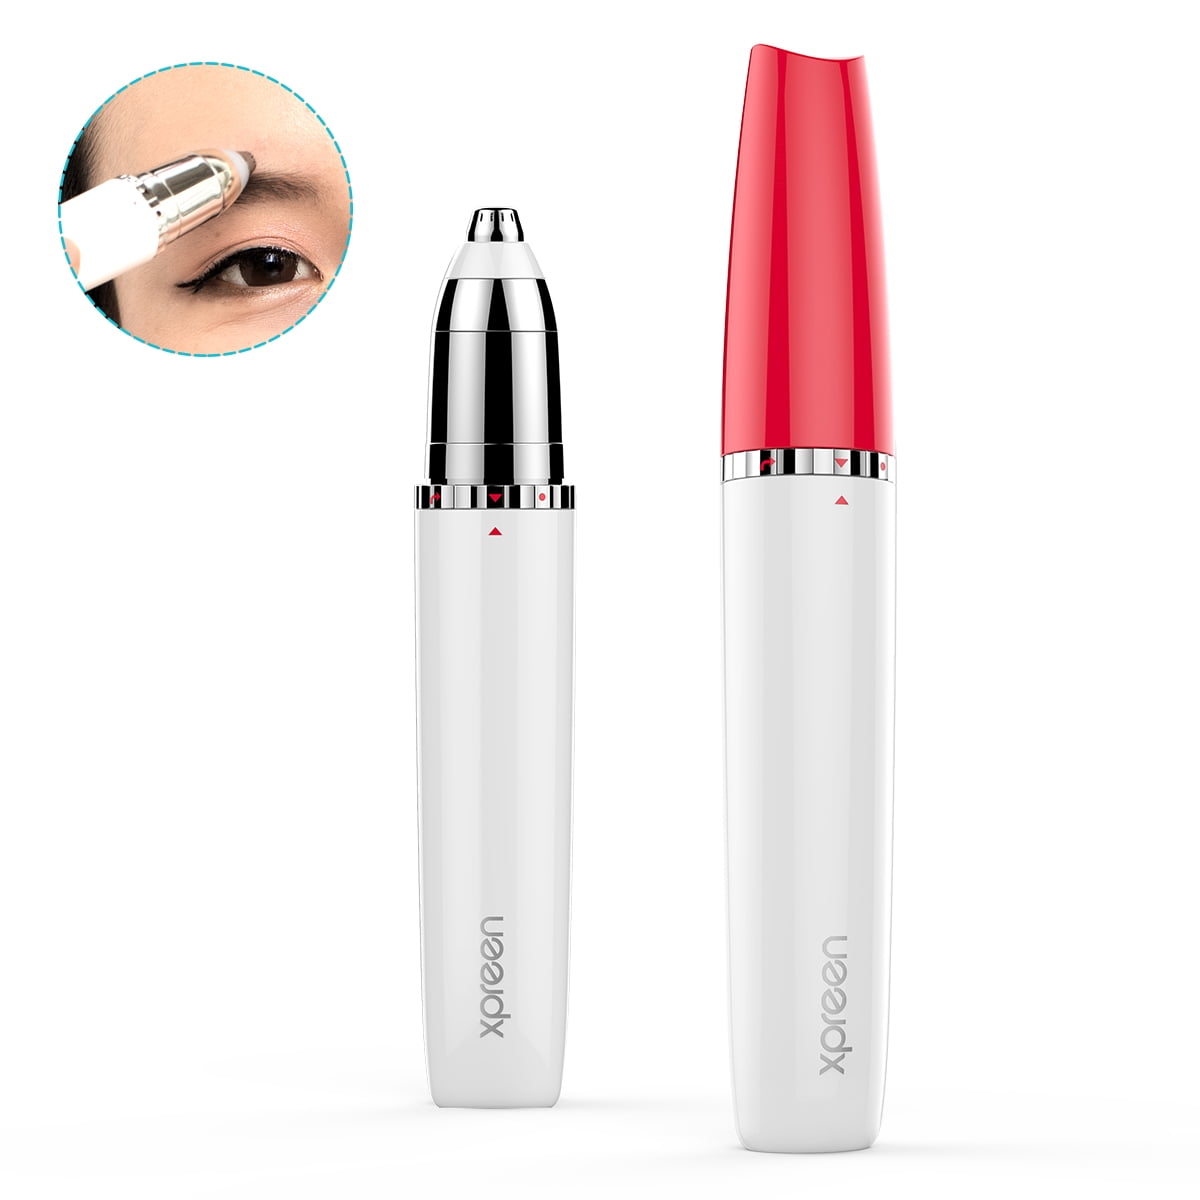 Finishing Touch Flawless Brows, Painless Precision Hair Remover 